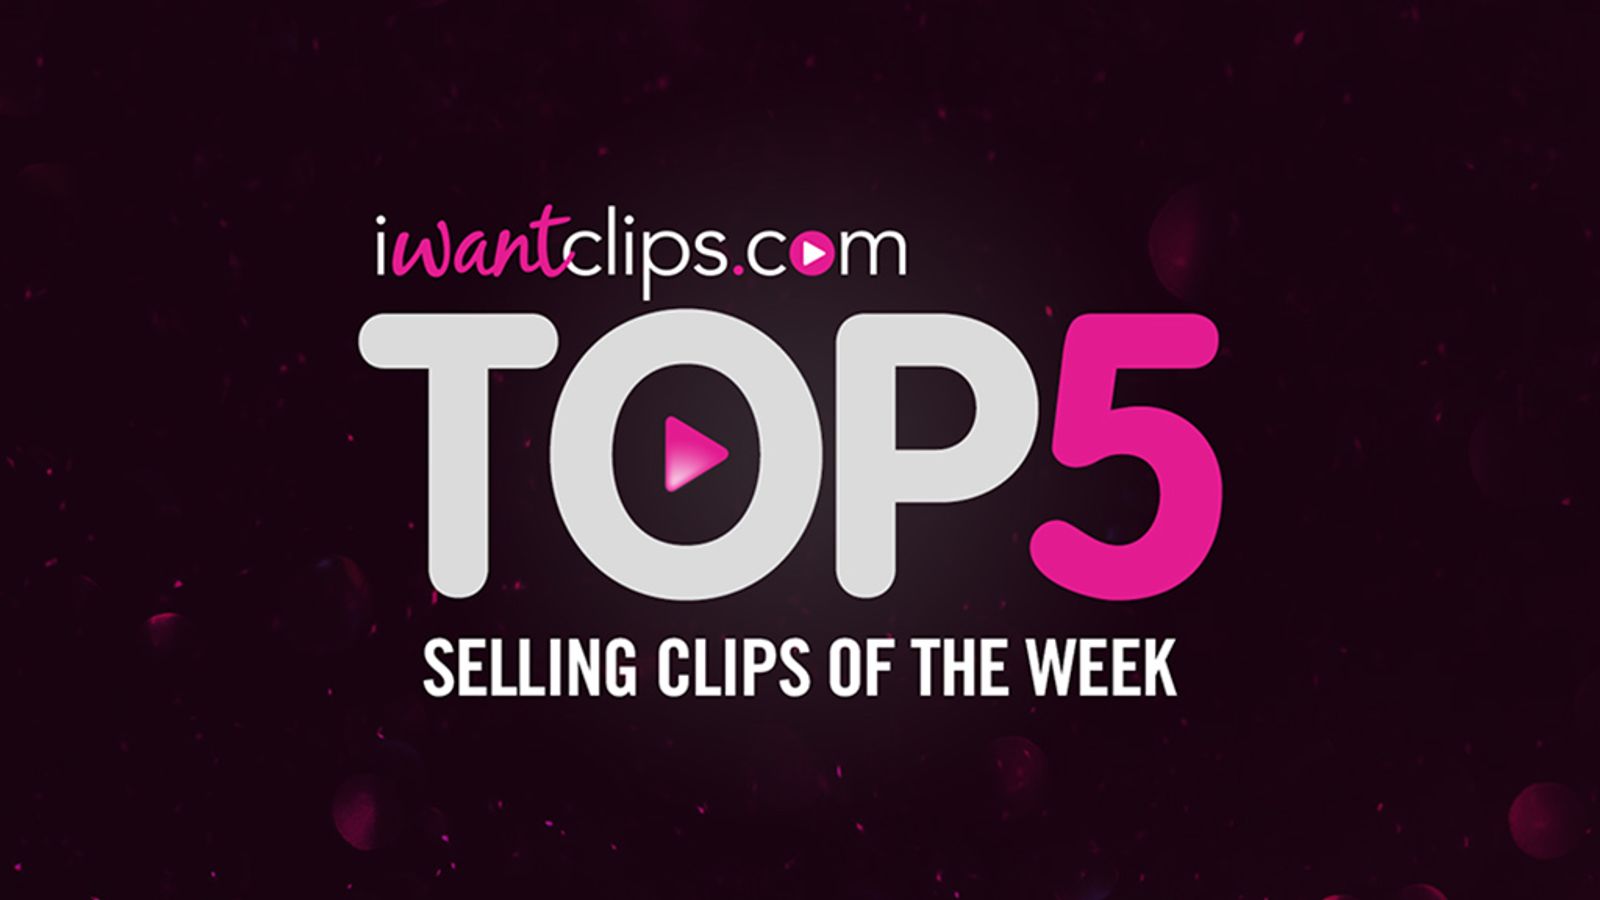 Violet Doll Tops iWantClips' Top 5 Clips of the Week